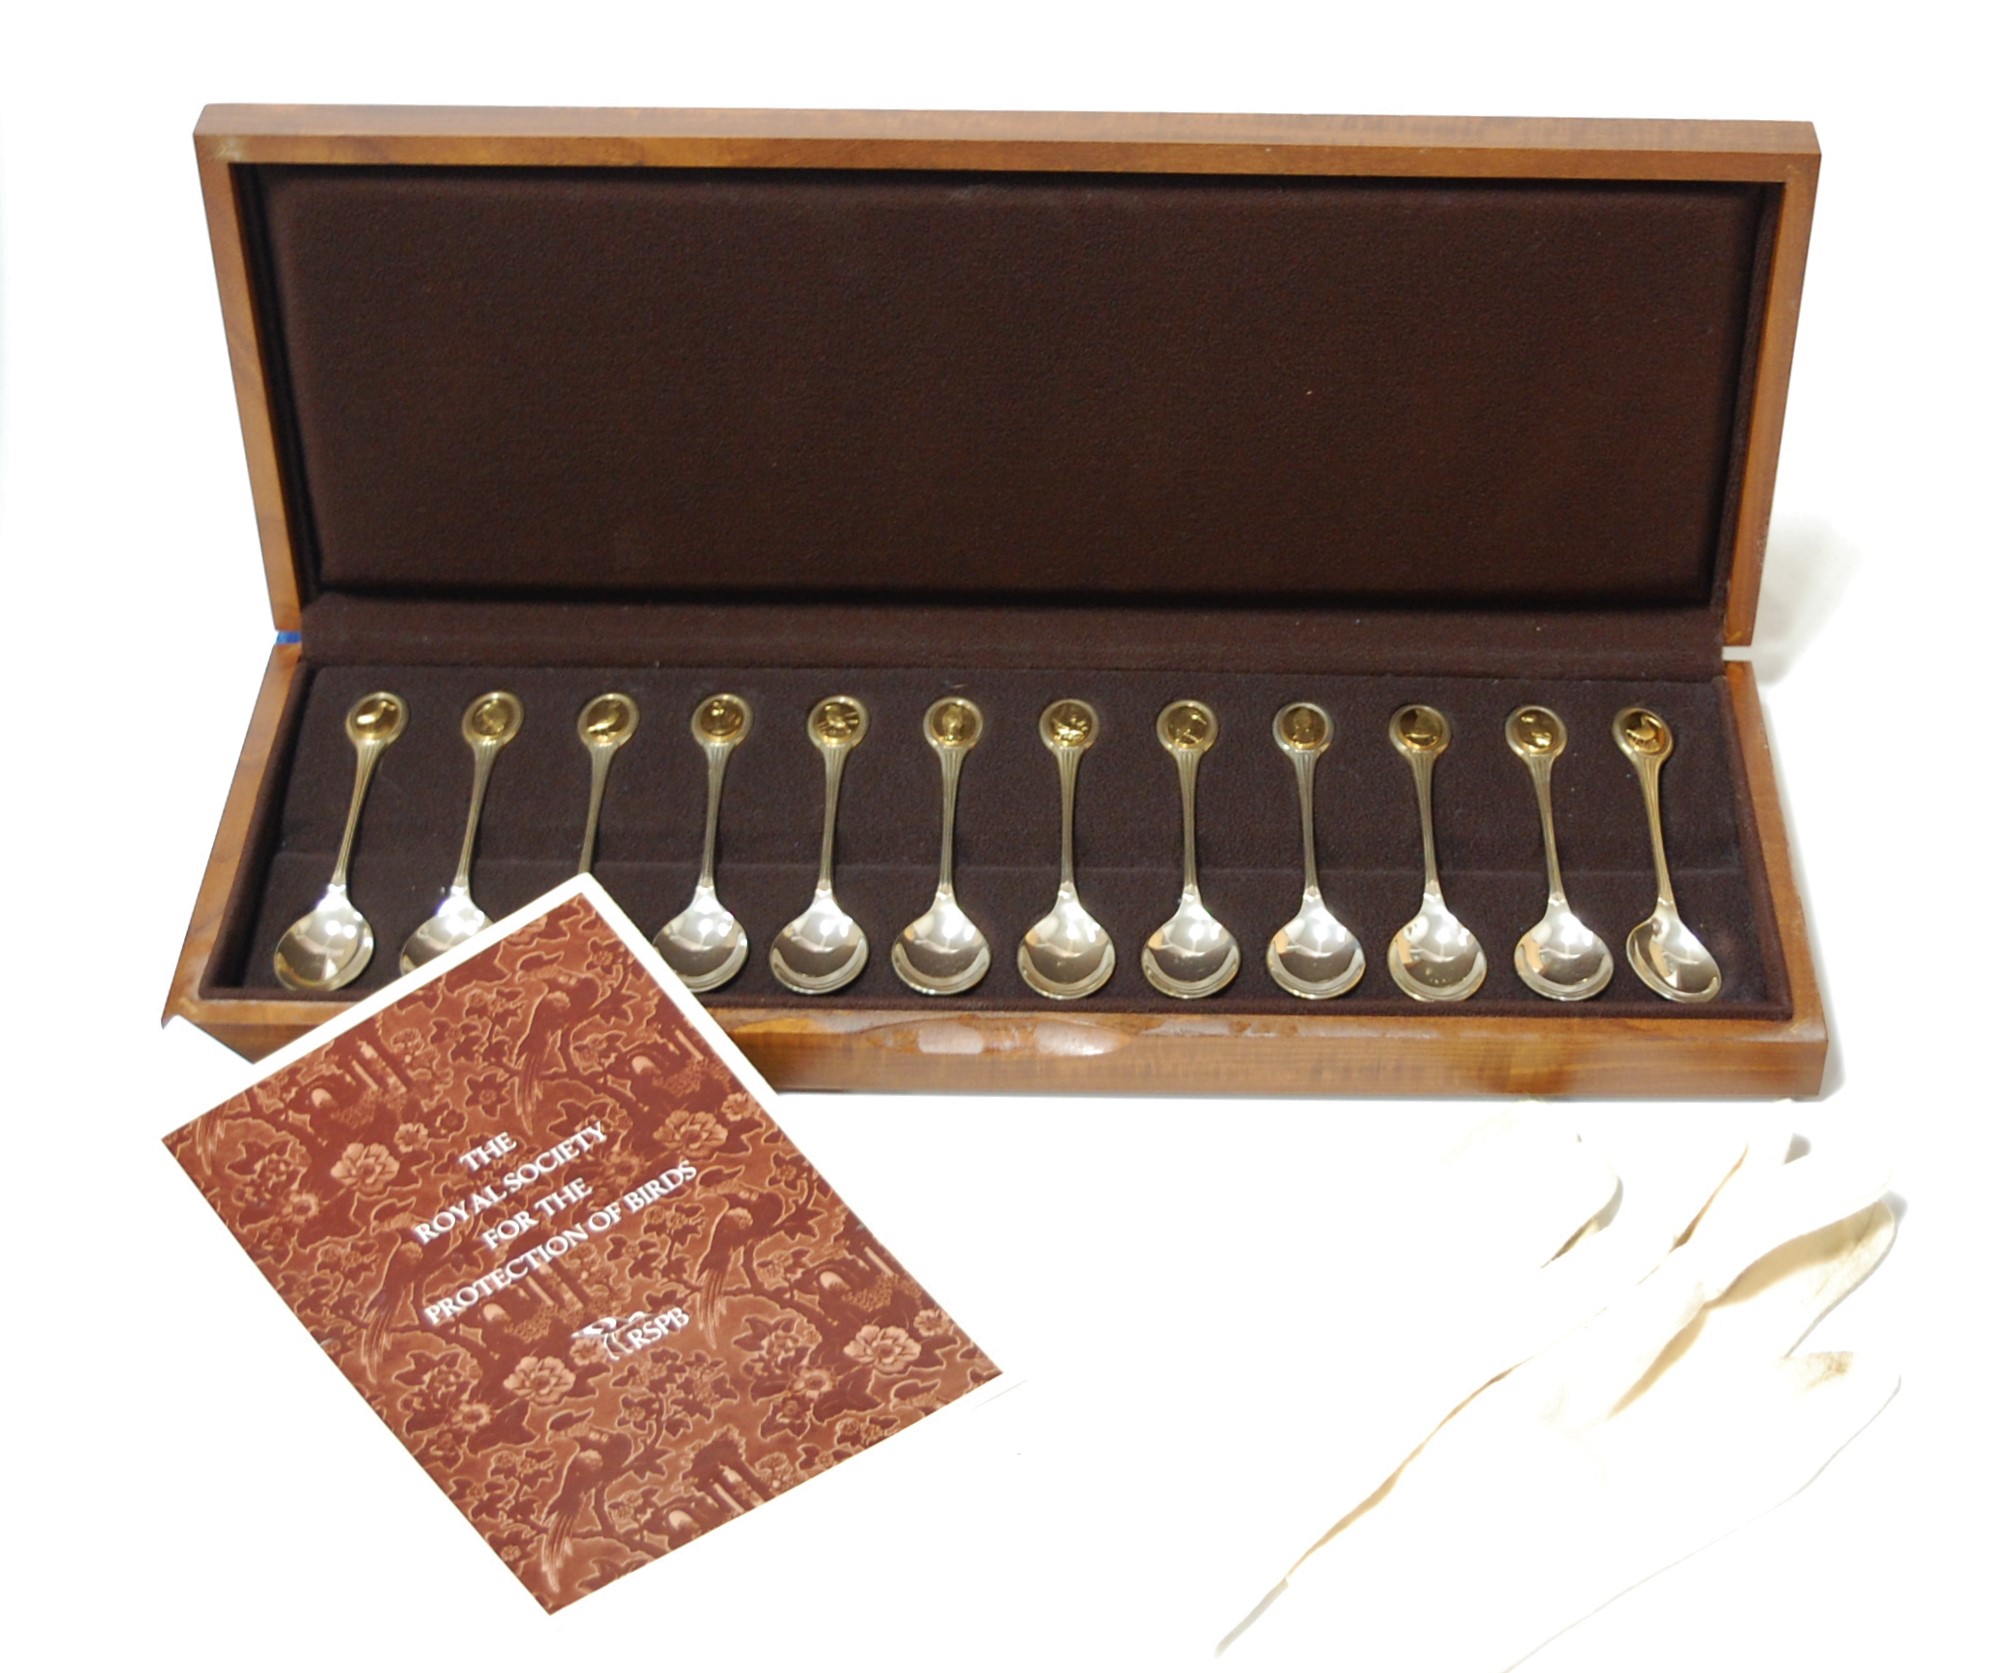 A cased set of 12 silver commemorative teaspoons as issued for the RSPB by Mappin & Webb